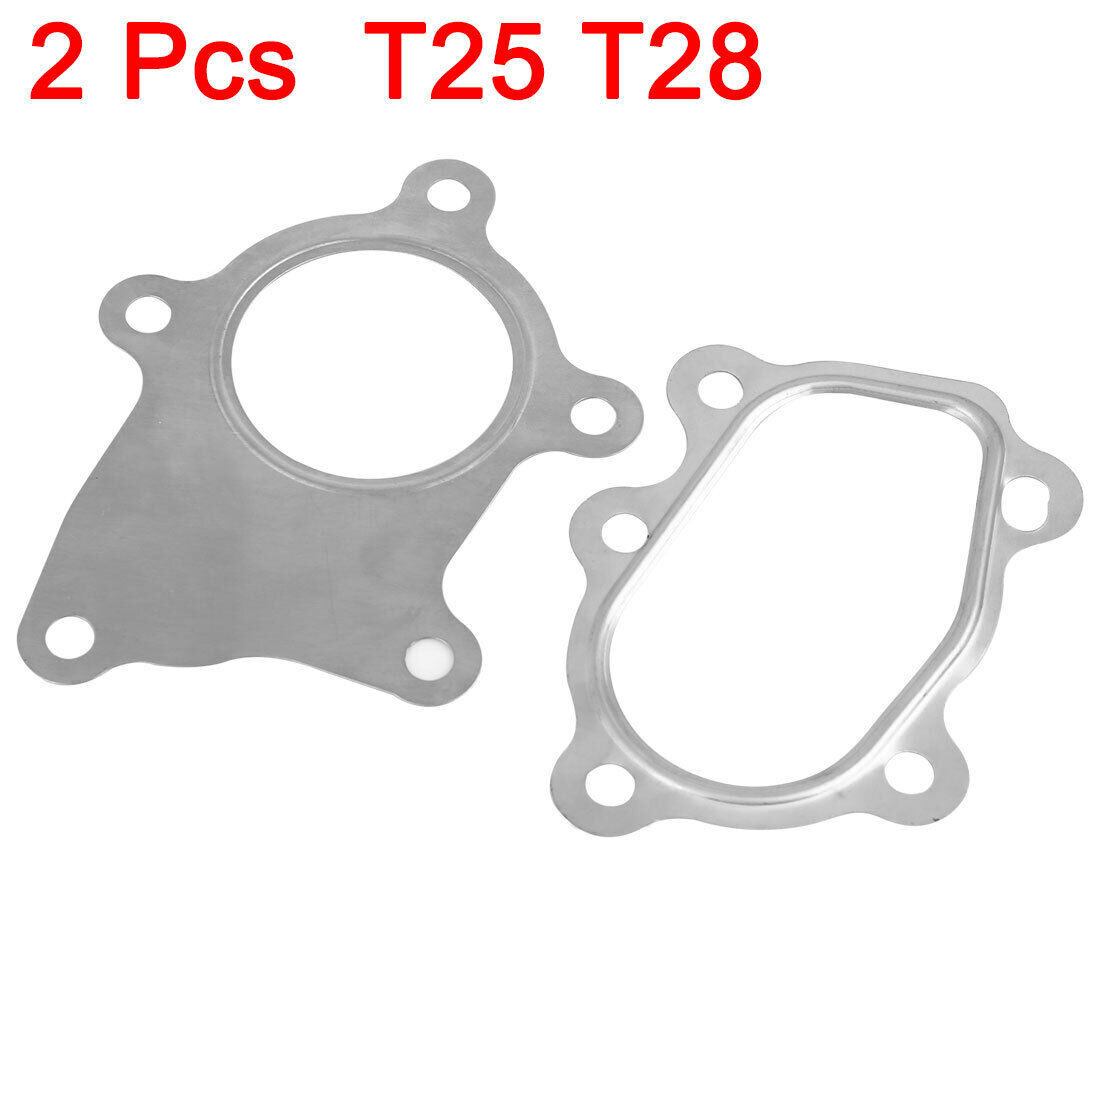 2in1 Stainless Steel 5 Bolt T25 T28  Downpipe Outlet Exhaust  Gasket